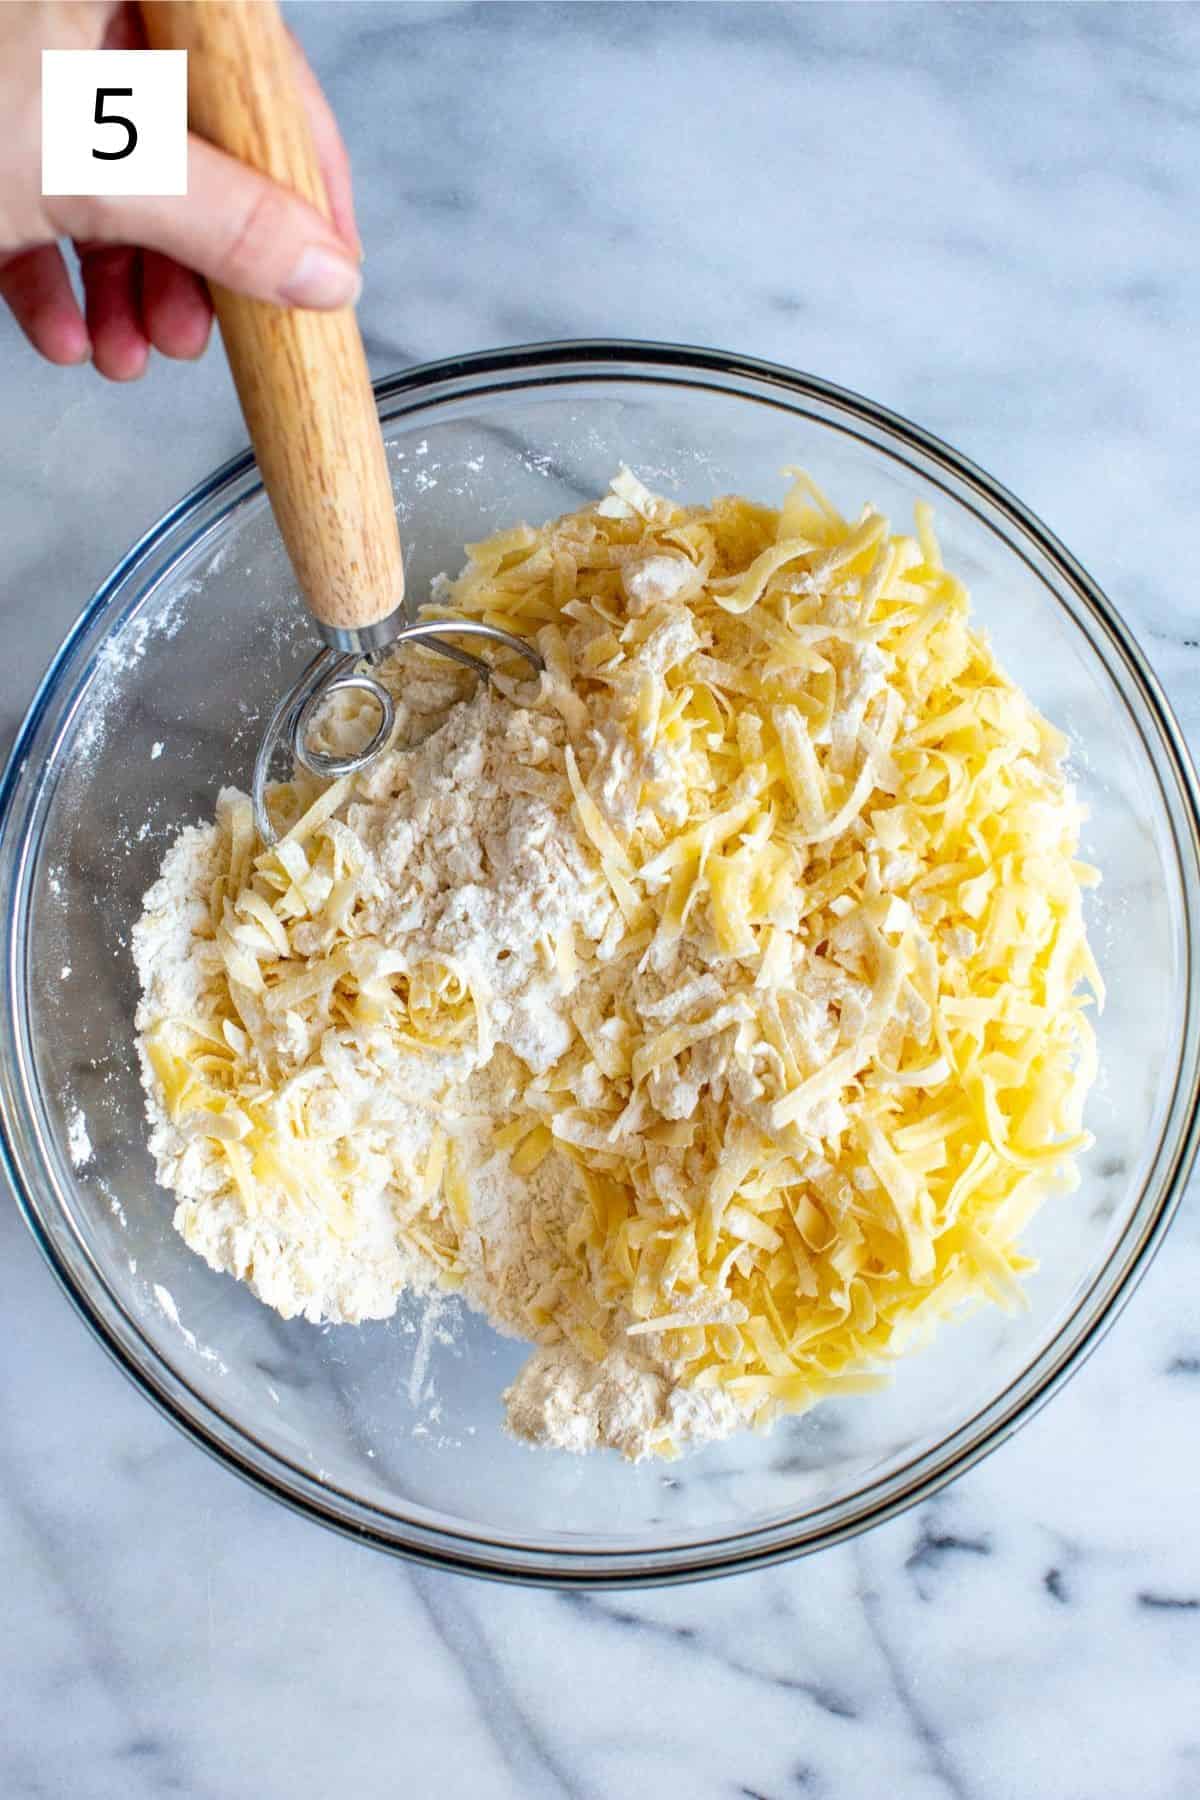 mixing grated cheddar into dry ingredients